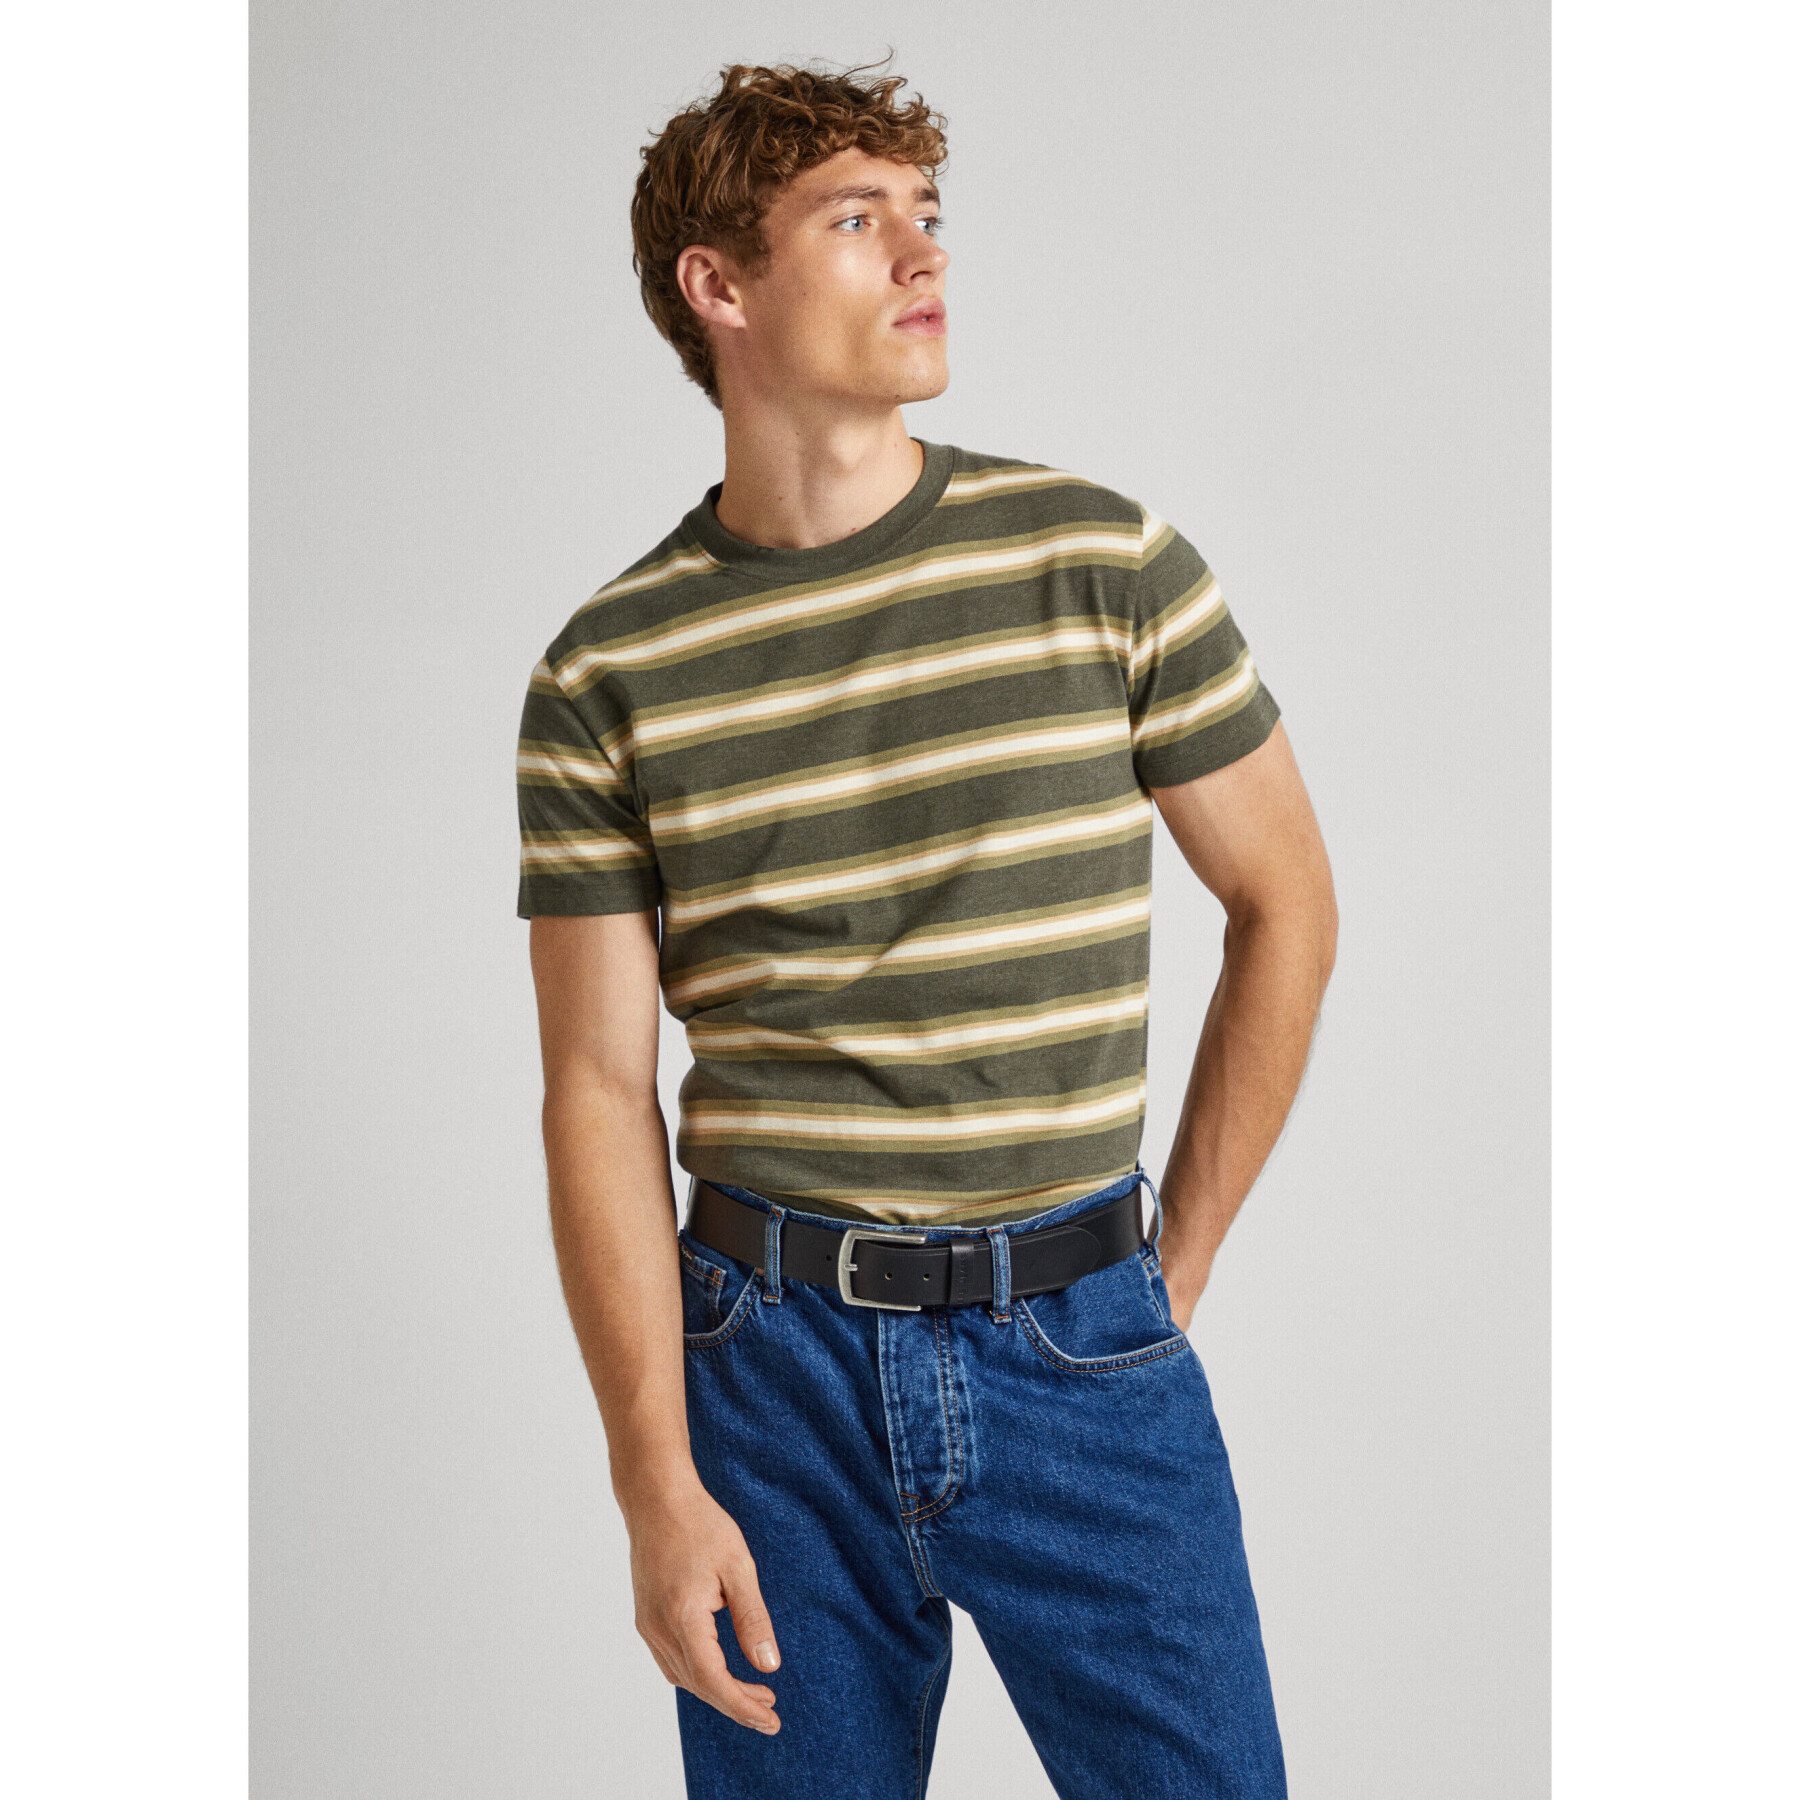 T-shirt Pepe Jeans Charn